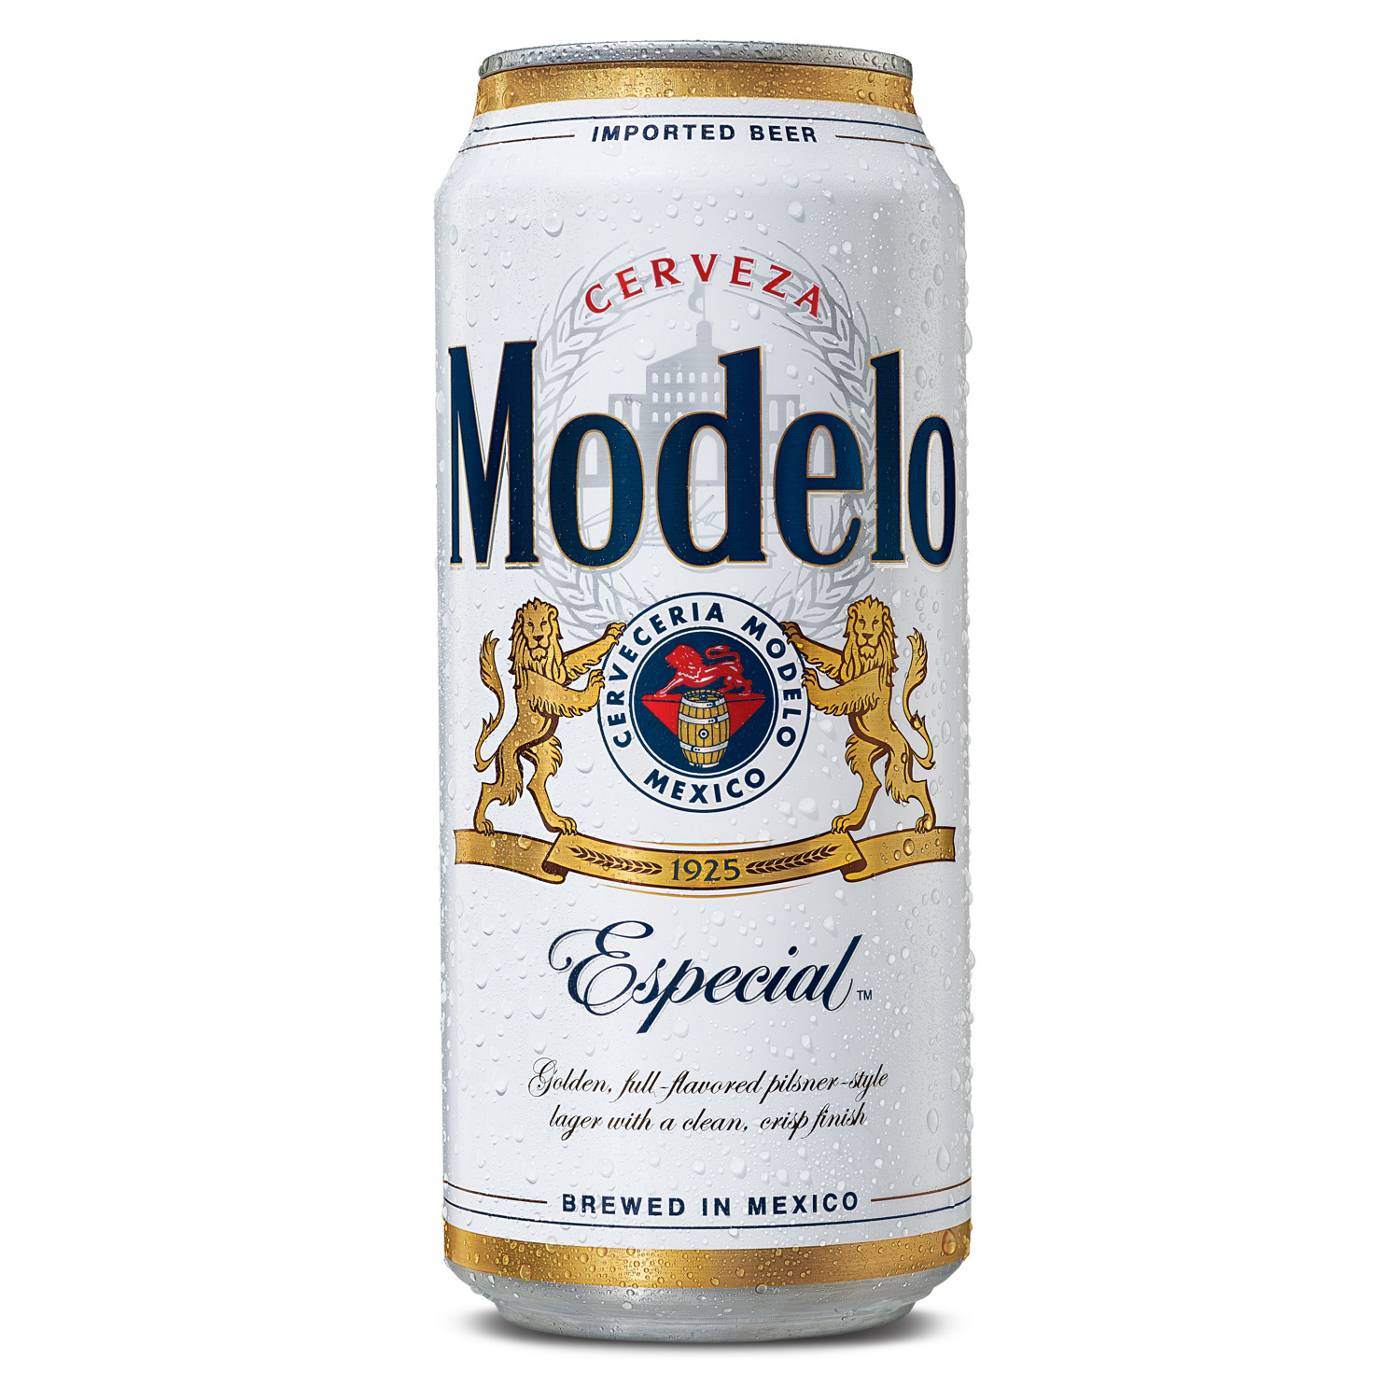 Modelo Especial Mexican Lager Import Beer 16 oz Cans, 4 pk; image 2 of 7